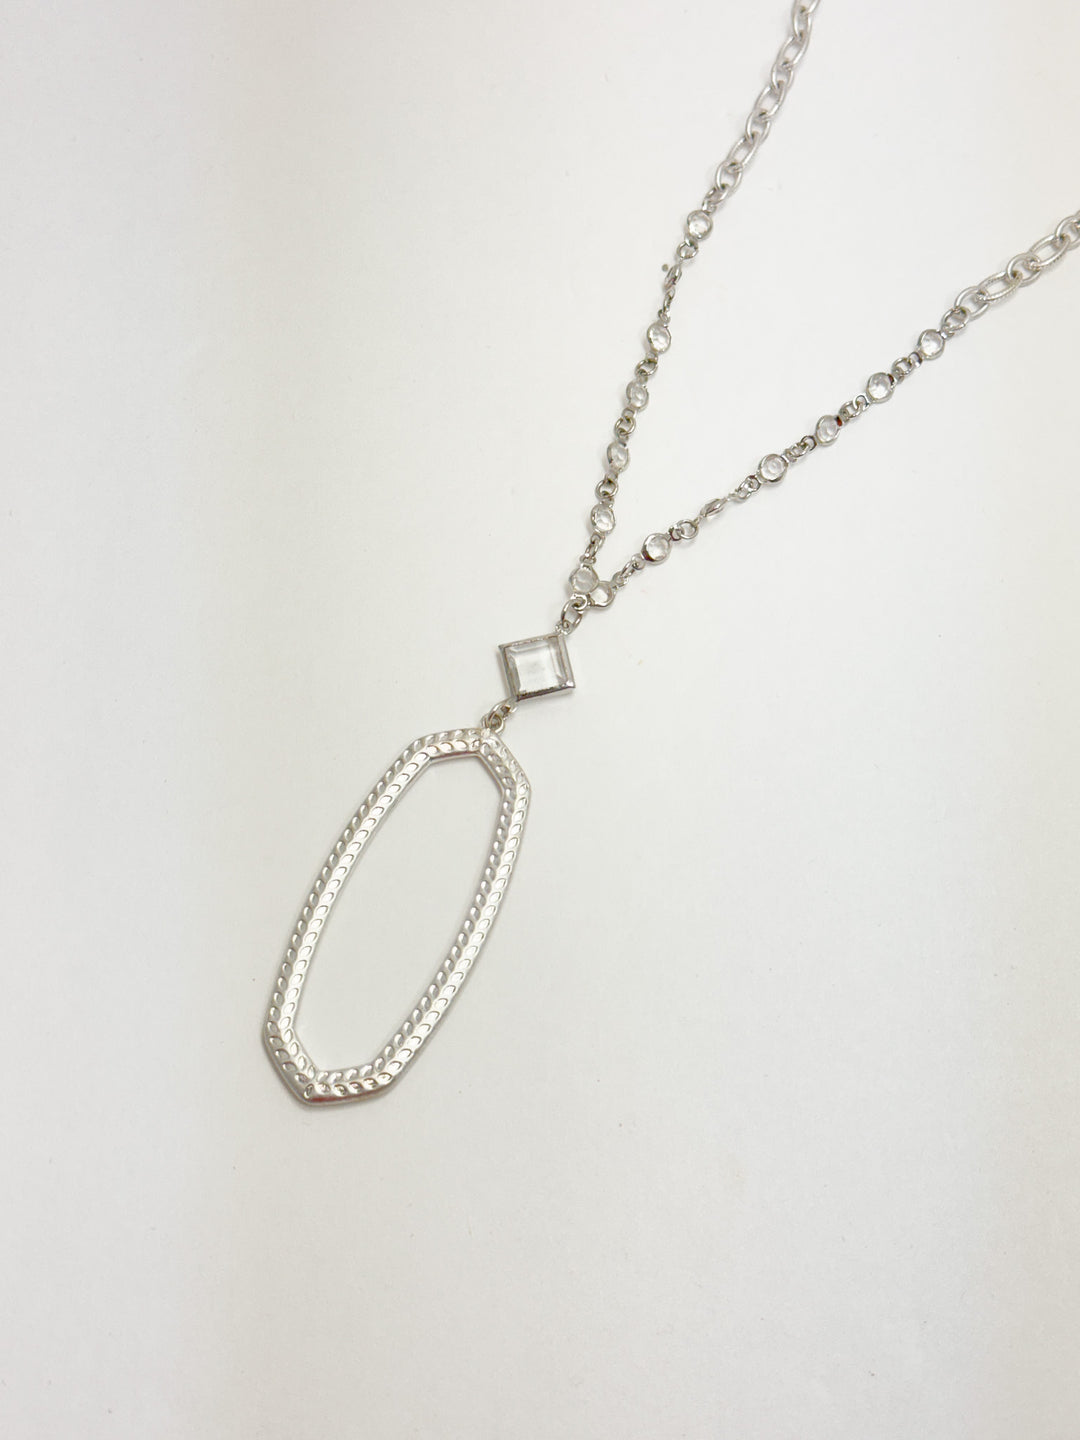 Long Silver Link Necklace w/ Oval Pendant